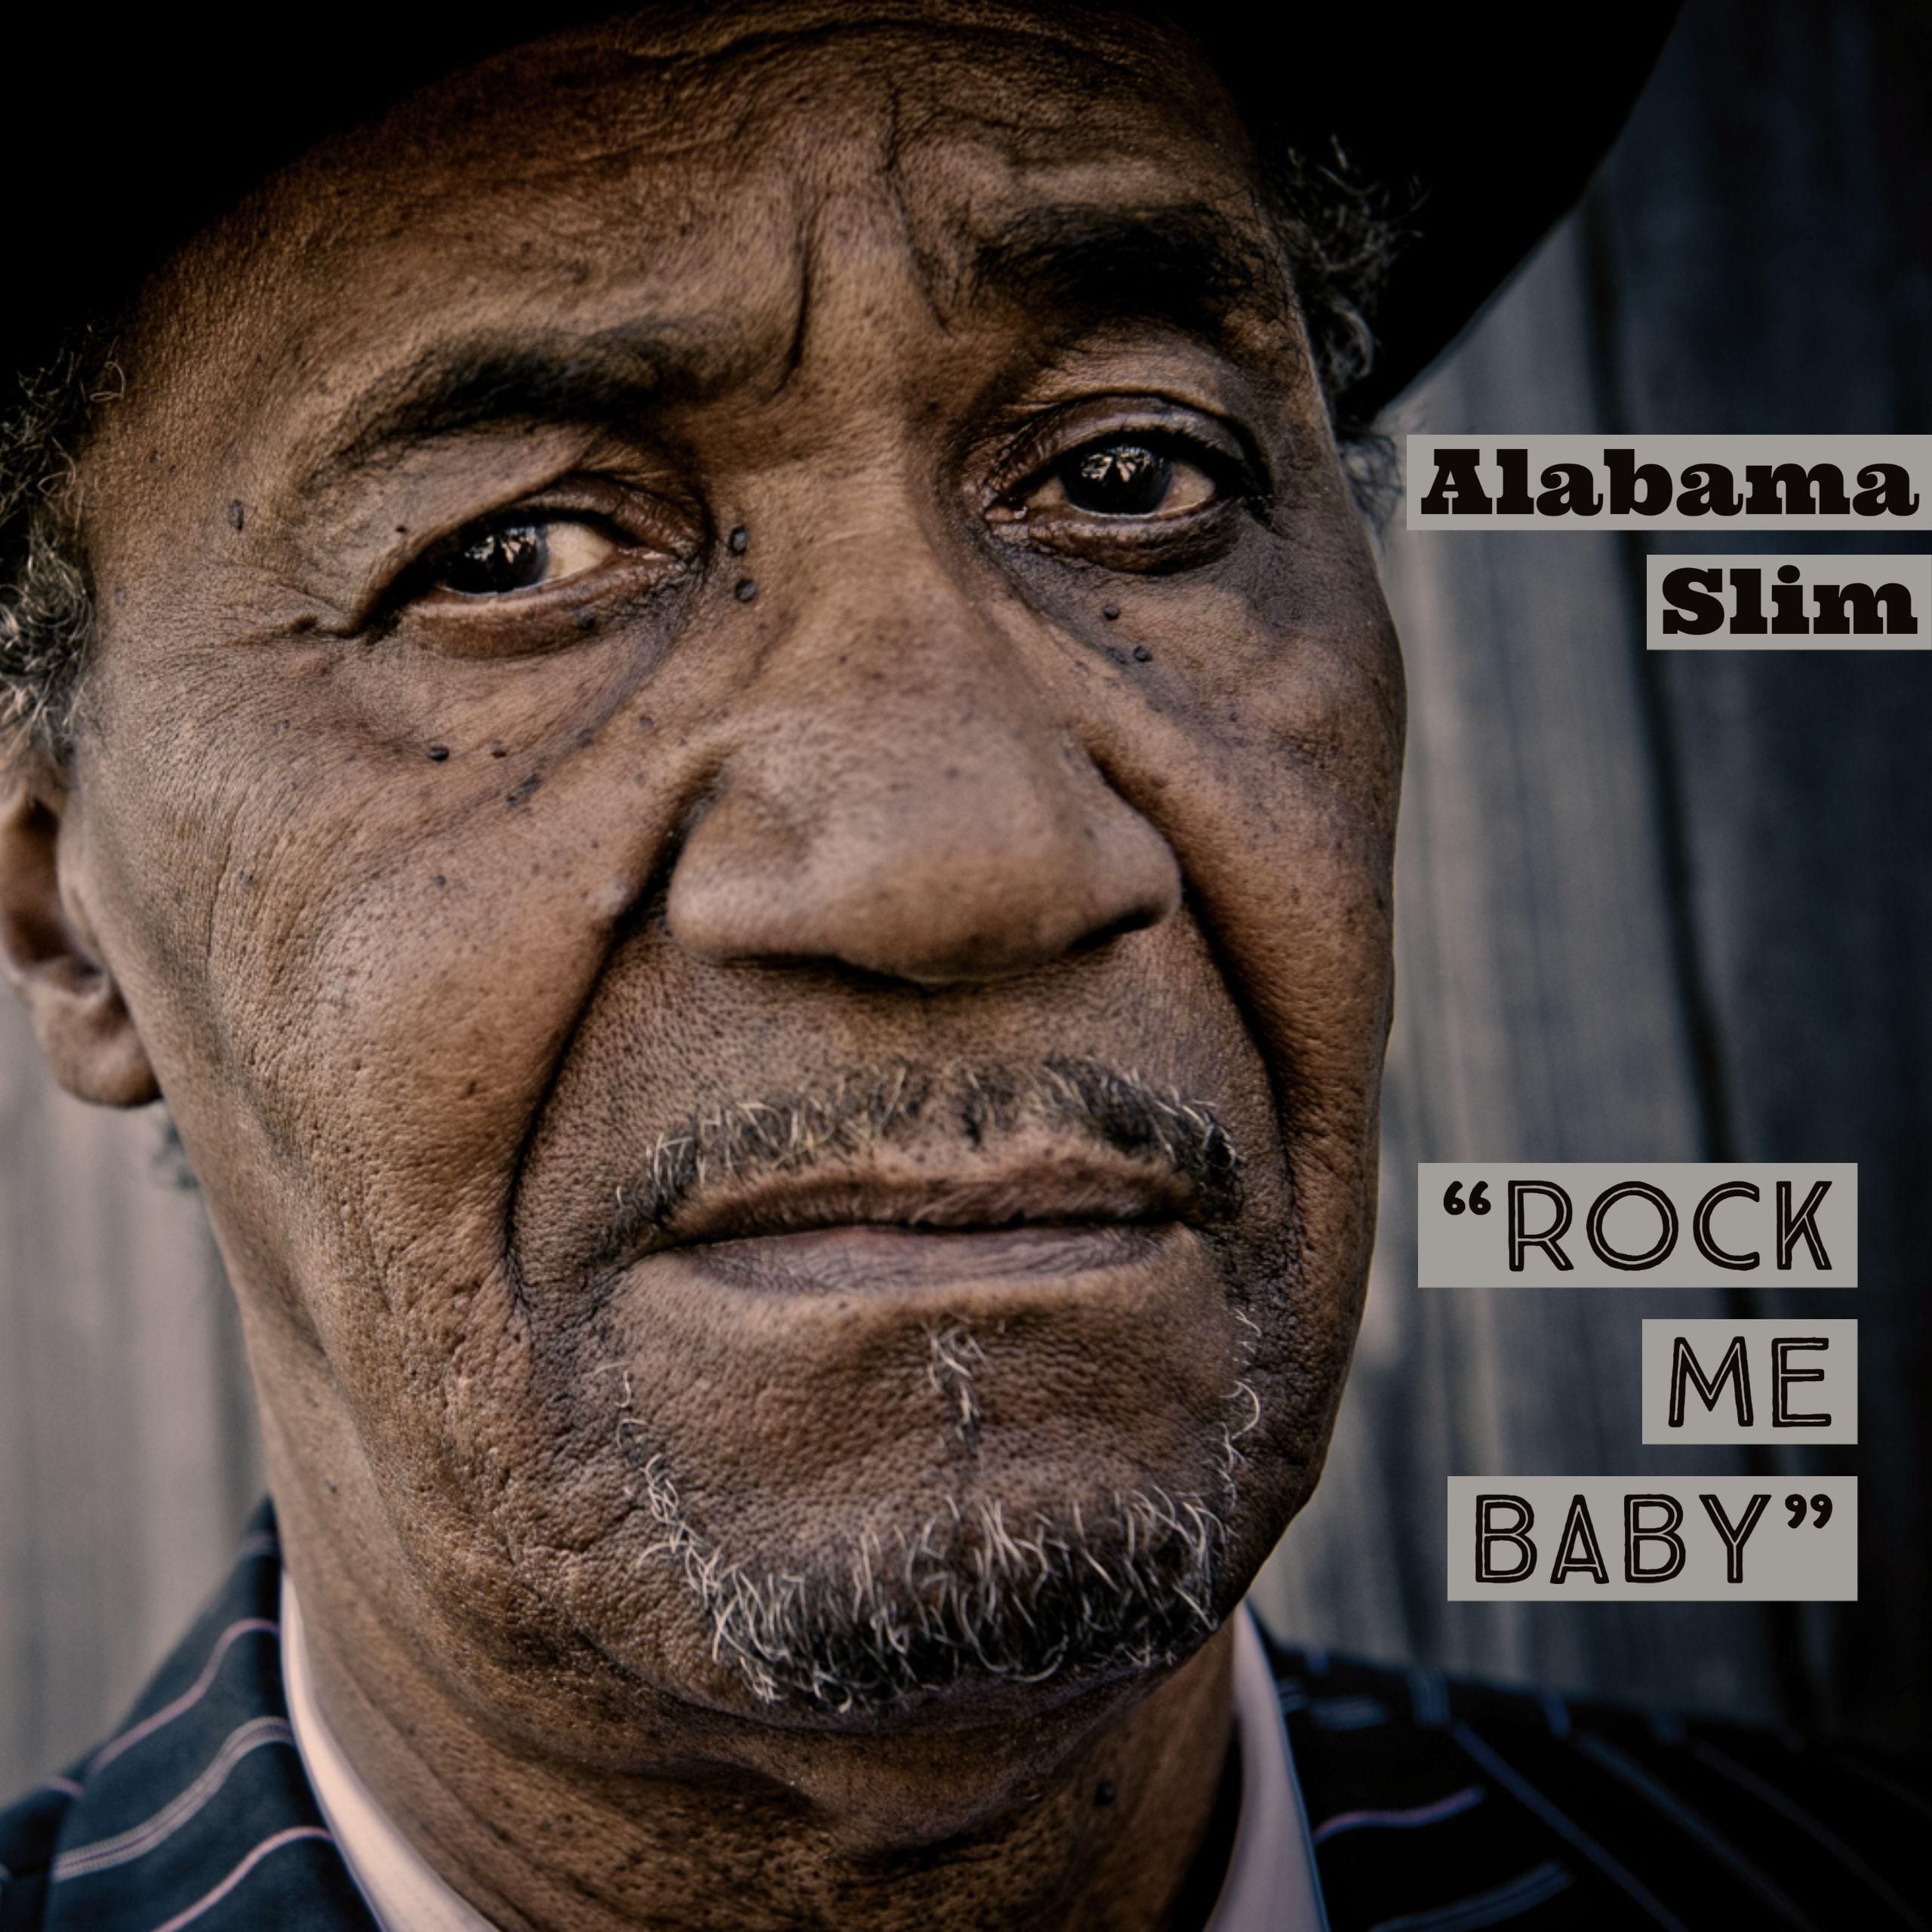 New Orleans Bluesman Alabama Slim Teases New Album with “Rock Me Baby” (premiere)